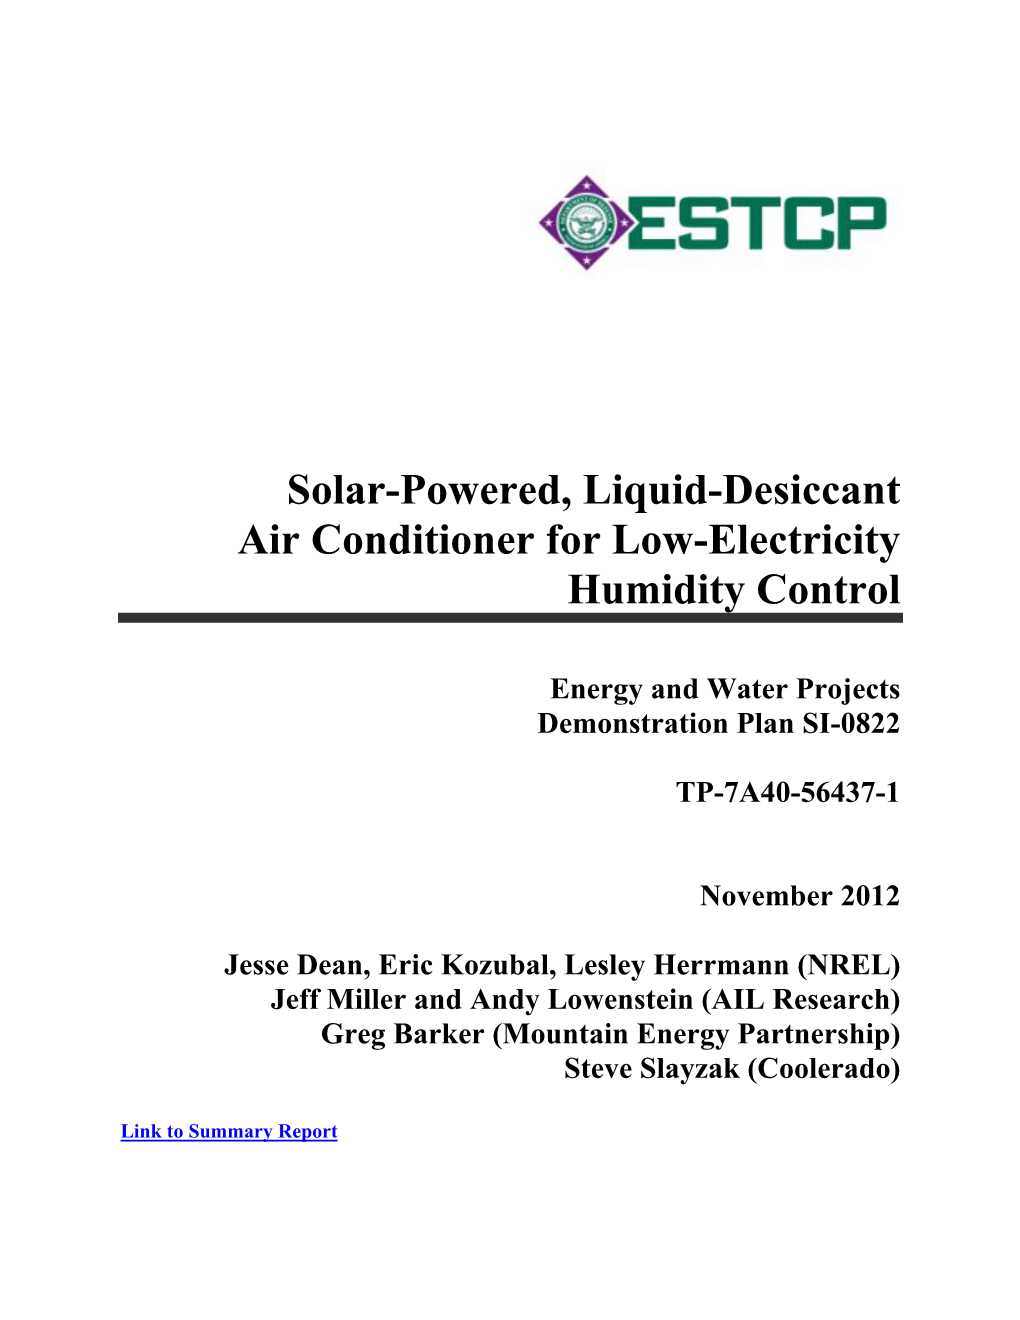 Solar-Powered, Liquid-Desiccant Air Conditioner for Low-Electricity Humidity Control